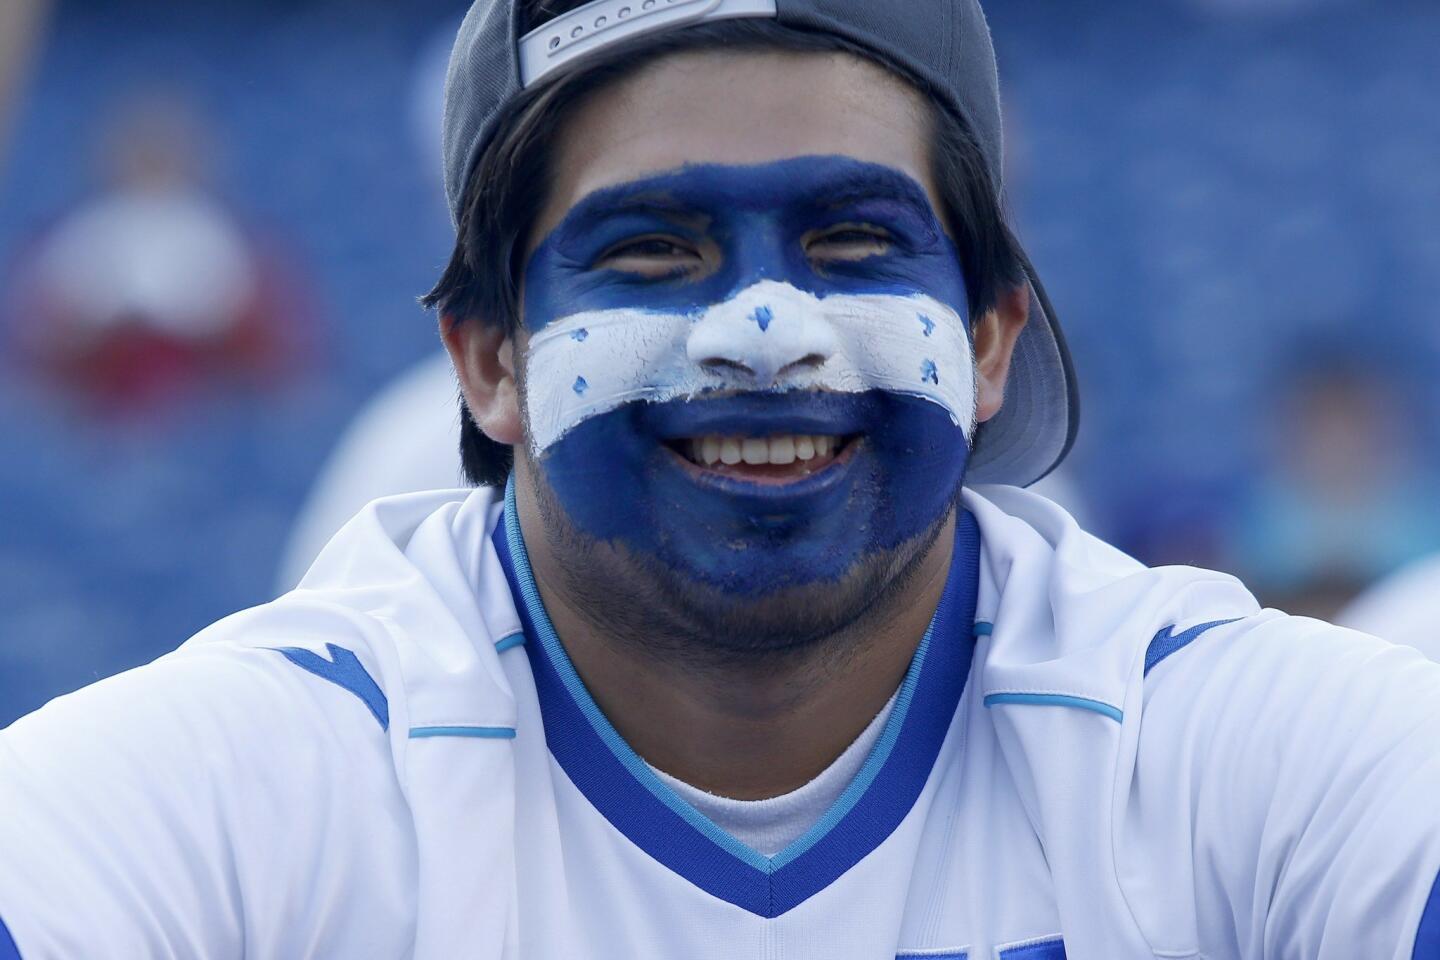 A Honduras fan smiles with face-paint before the CONCACAF Gold Cup match between Honduras and Panama in Foxborough, Massachusetts on July 10, 2015. AFP PHOTO/ DOMINICK REUTERDOMINICK REUTER/AFP/Getty Images ** OUTS - ELSENT, FPG - OUTS * NM, PH, VA if sourced by CT, LA or MoD **